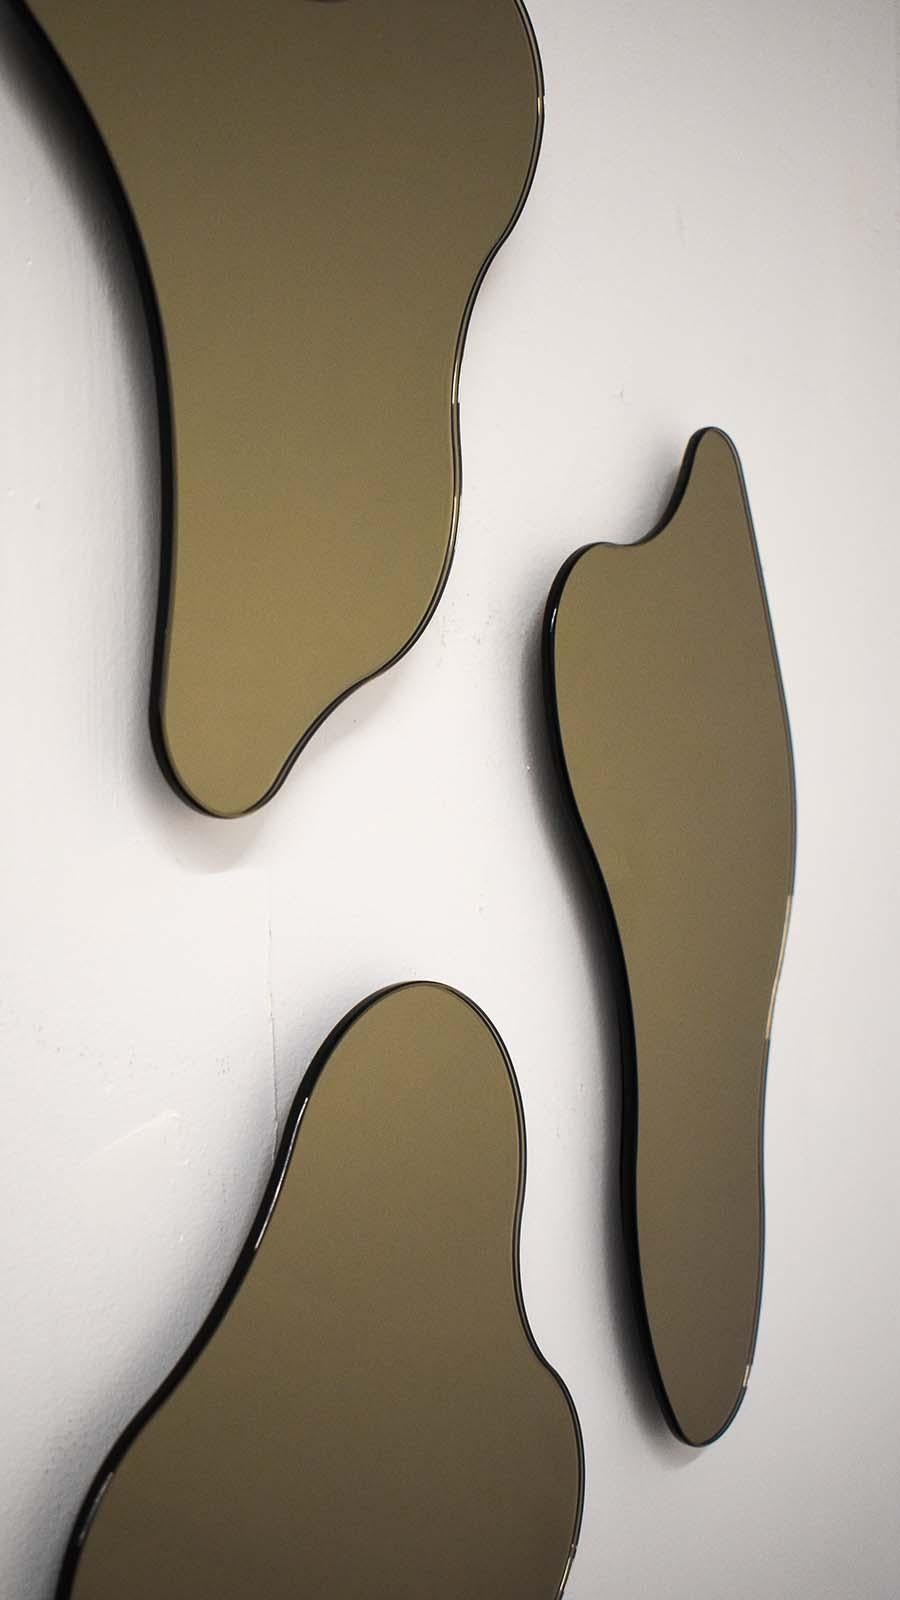 ISLA MIRRORS - Composition No. 3
Materials: Bronze Glass, Black MDF 
Dimensions: 19”W X 1”D X 29”H

Minimalist, elegant, amorphically shaped floating bronze glass mirrors inspired by the topography of the Philippine archipelago. The ISLA Mirrors